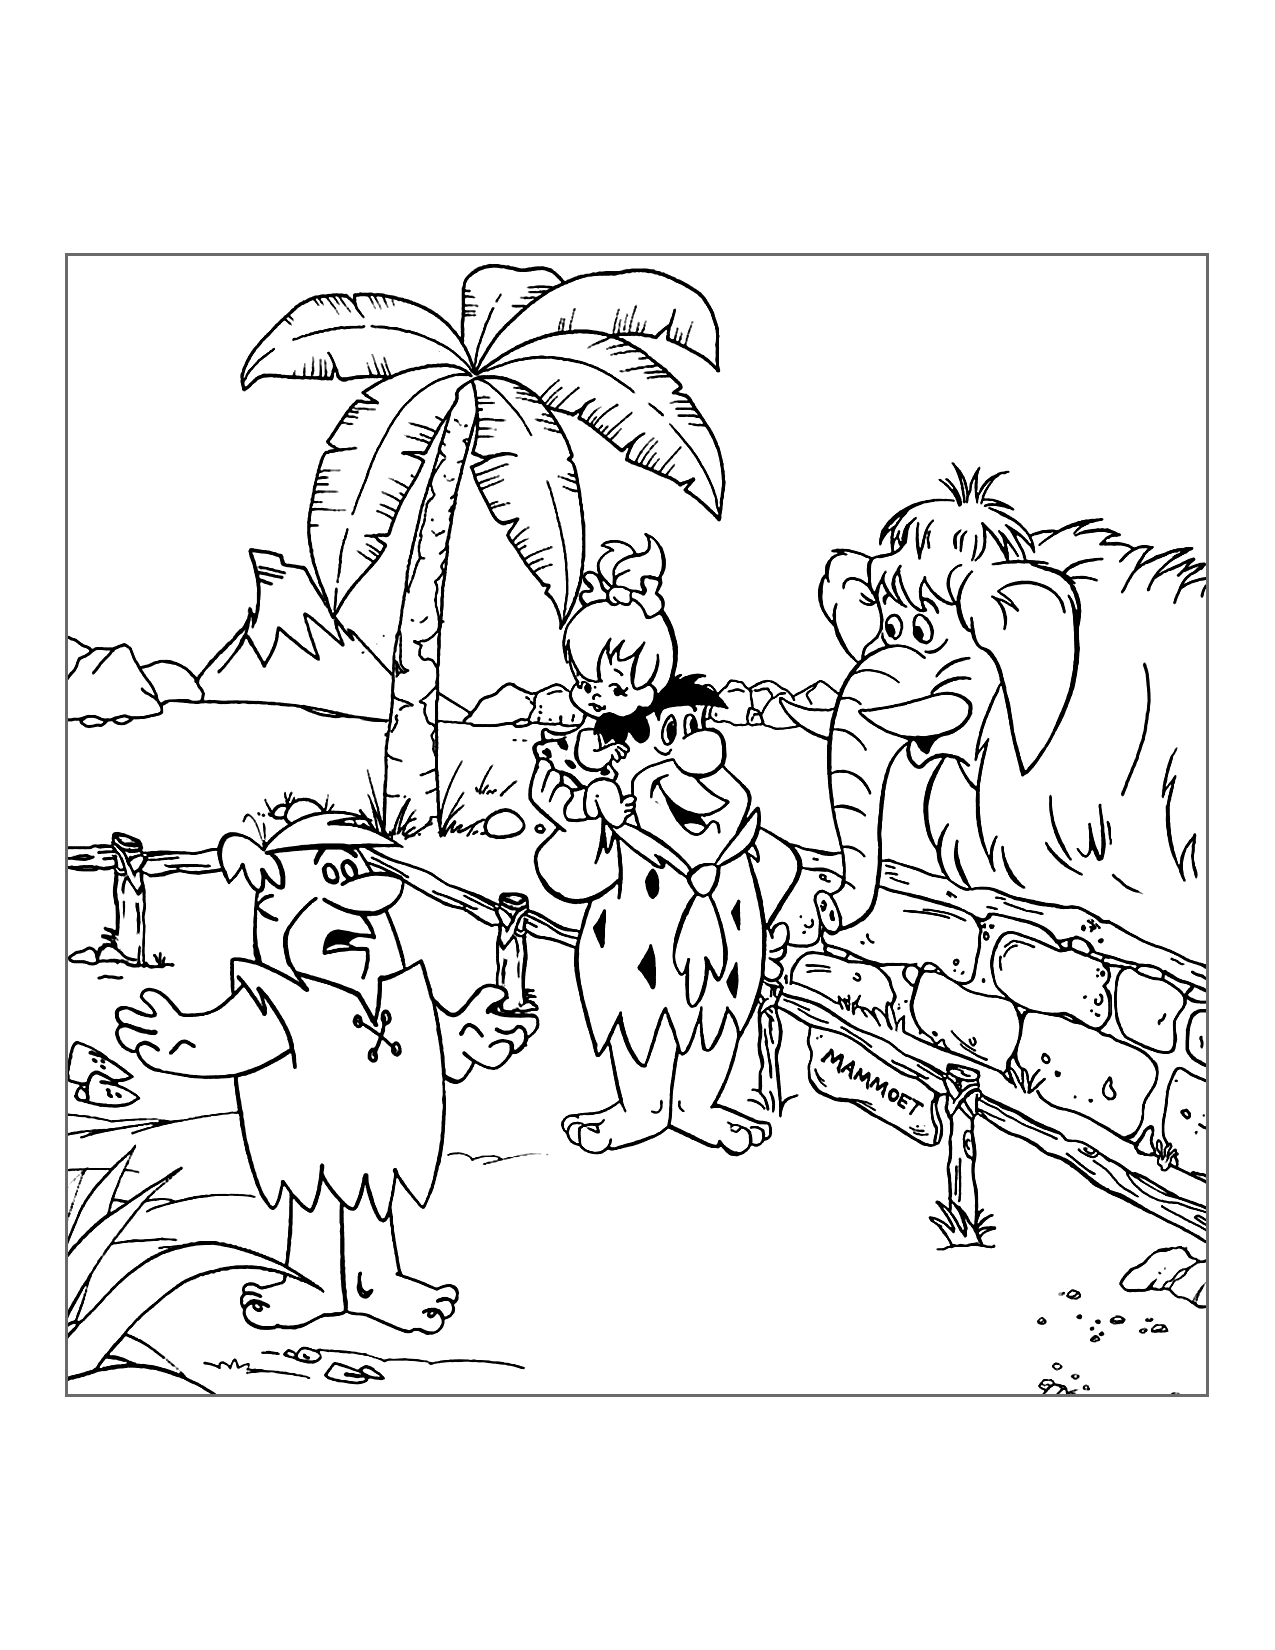 Flintstones At The Zoo Coloring Page